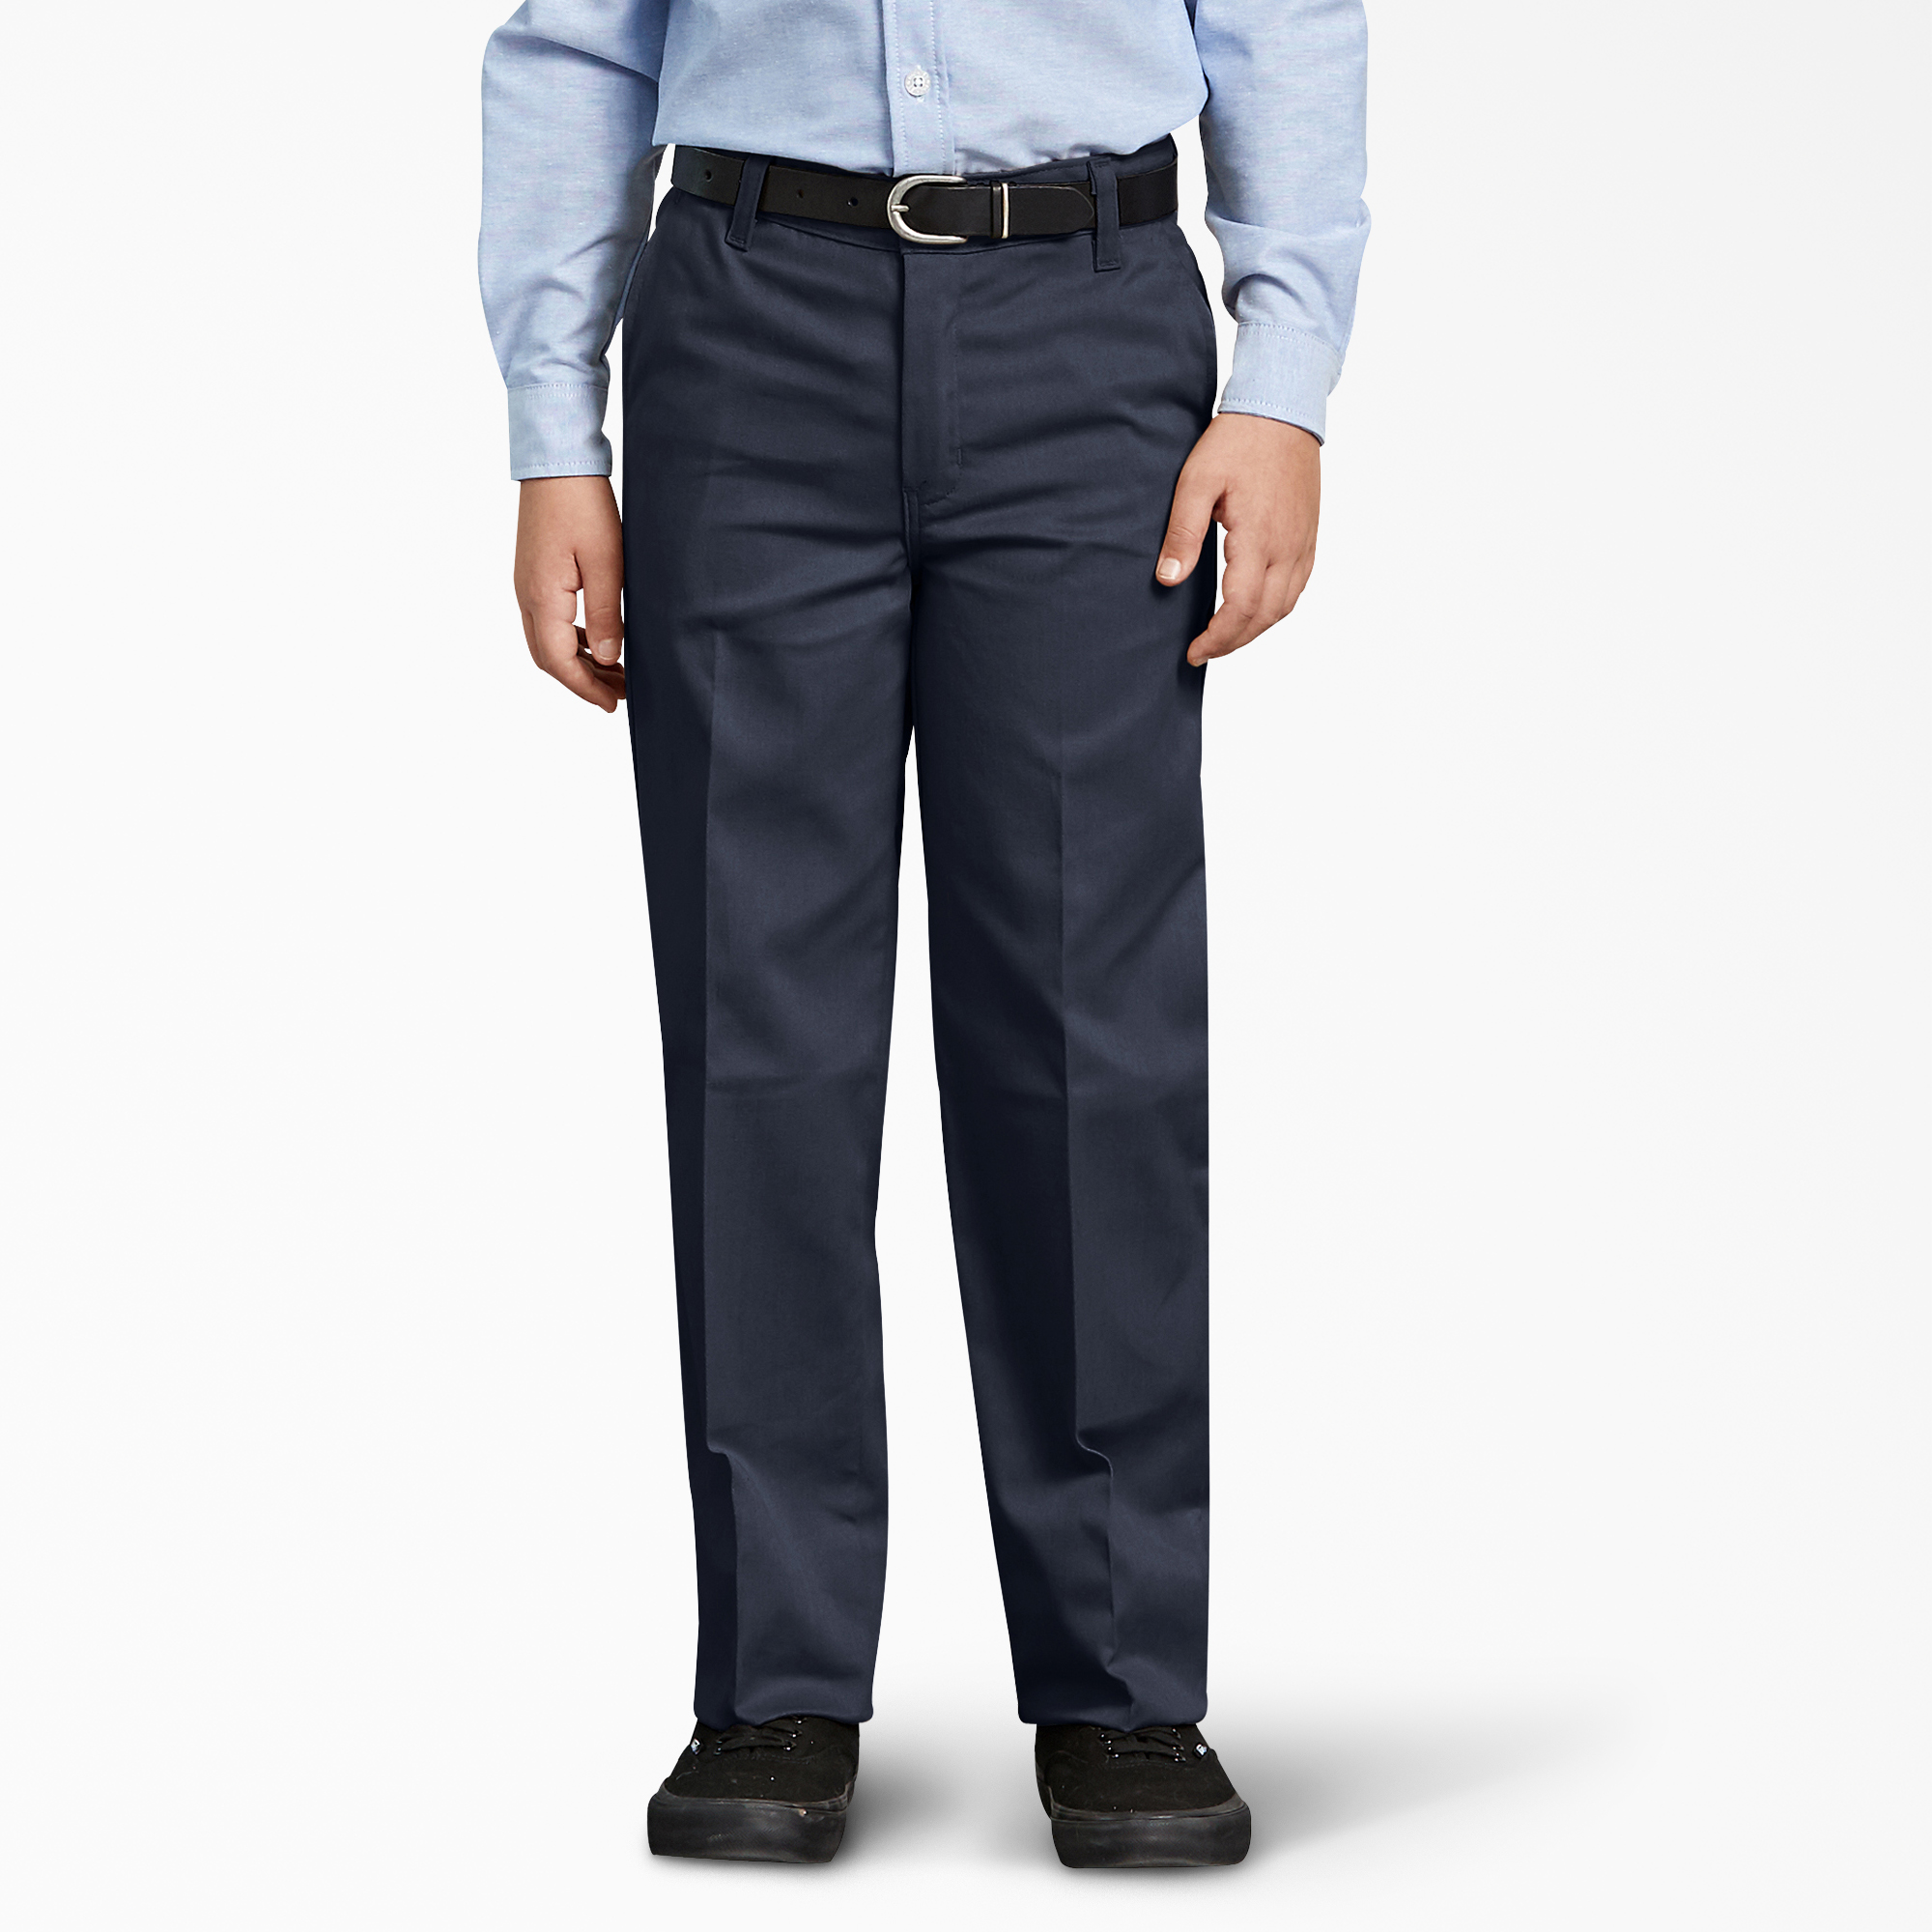 Flexible Work Pants for Men - Dickies FLEX Collection, Blue, Brown 